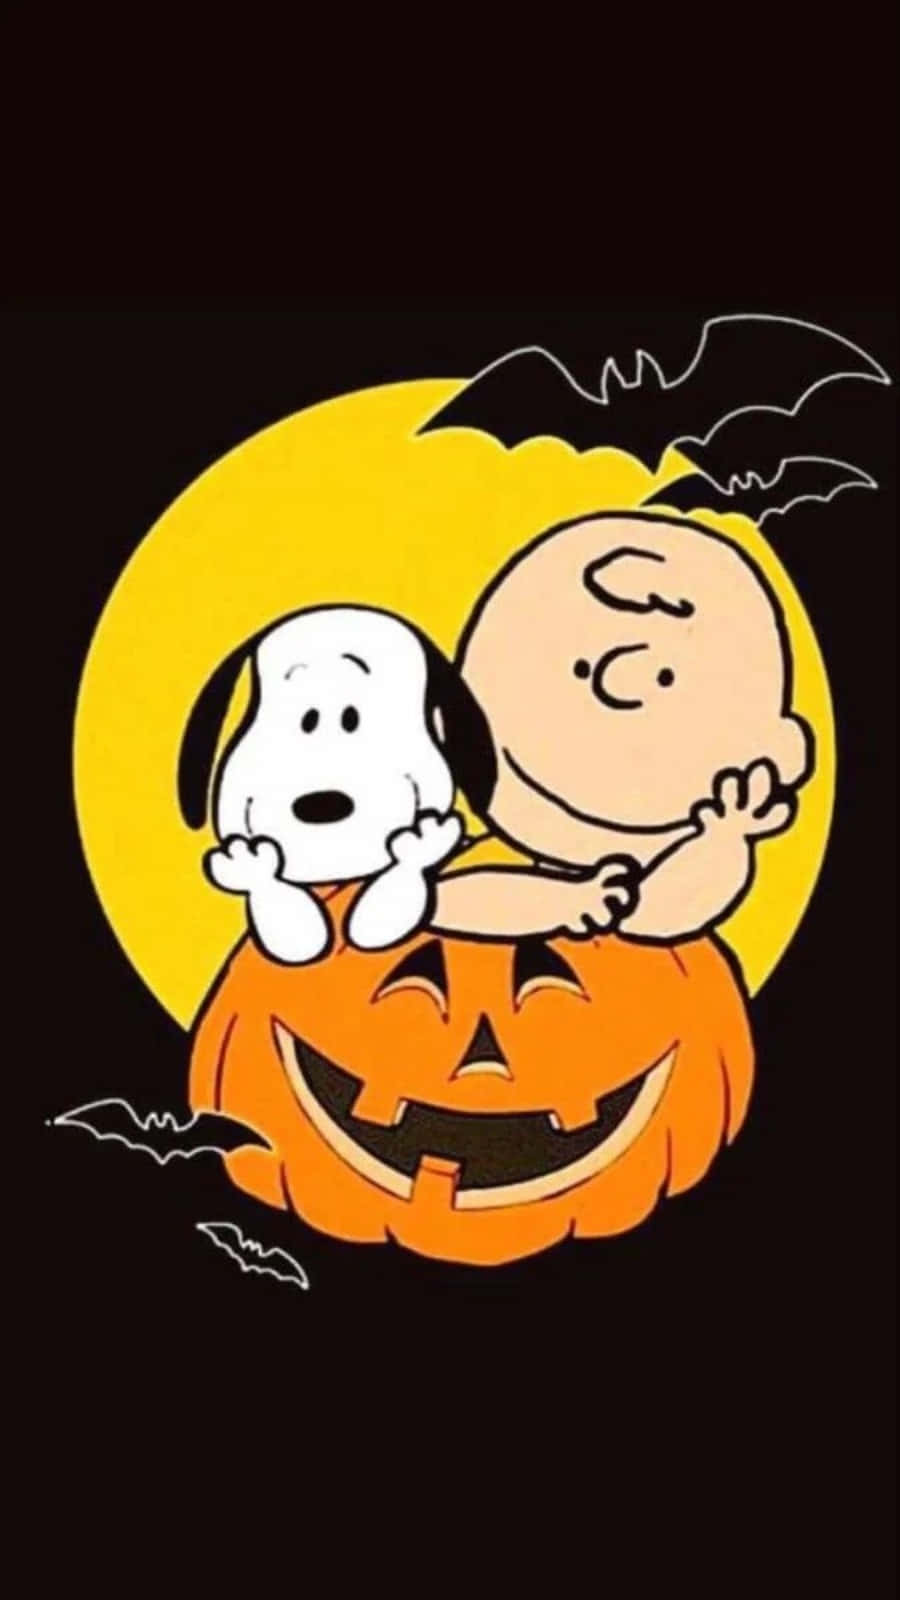 Charlie Brown And Friends Rejoice In The Halloween Spirit